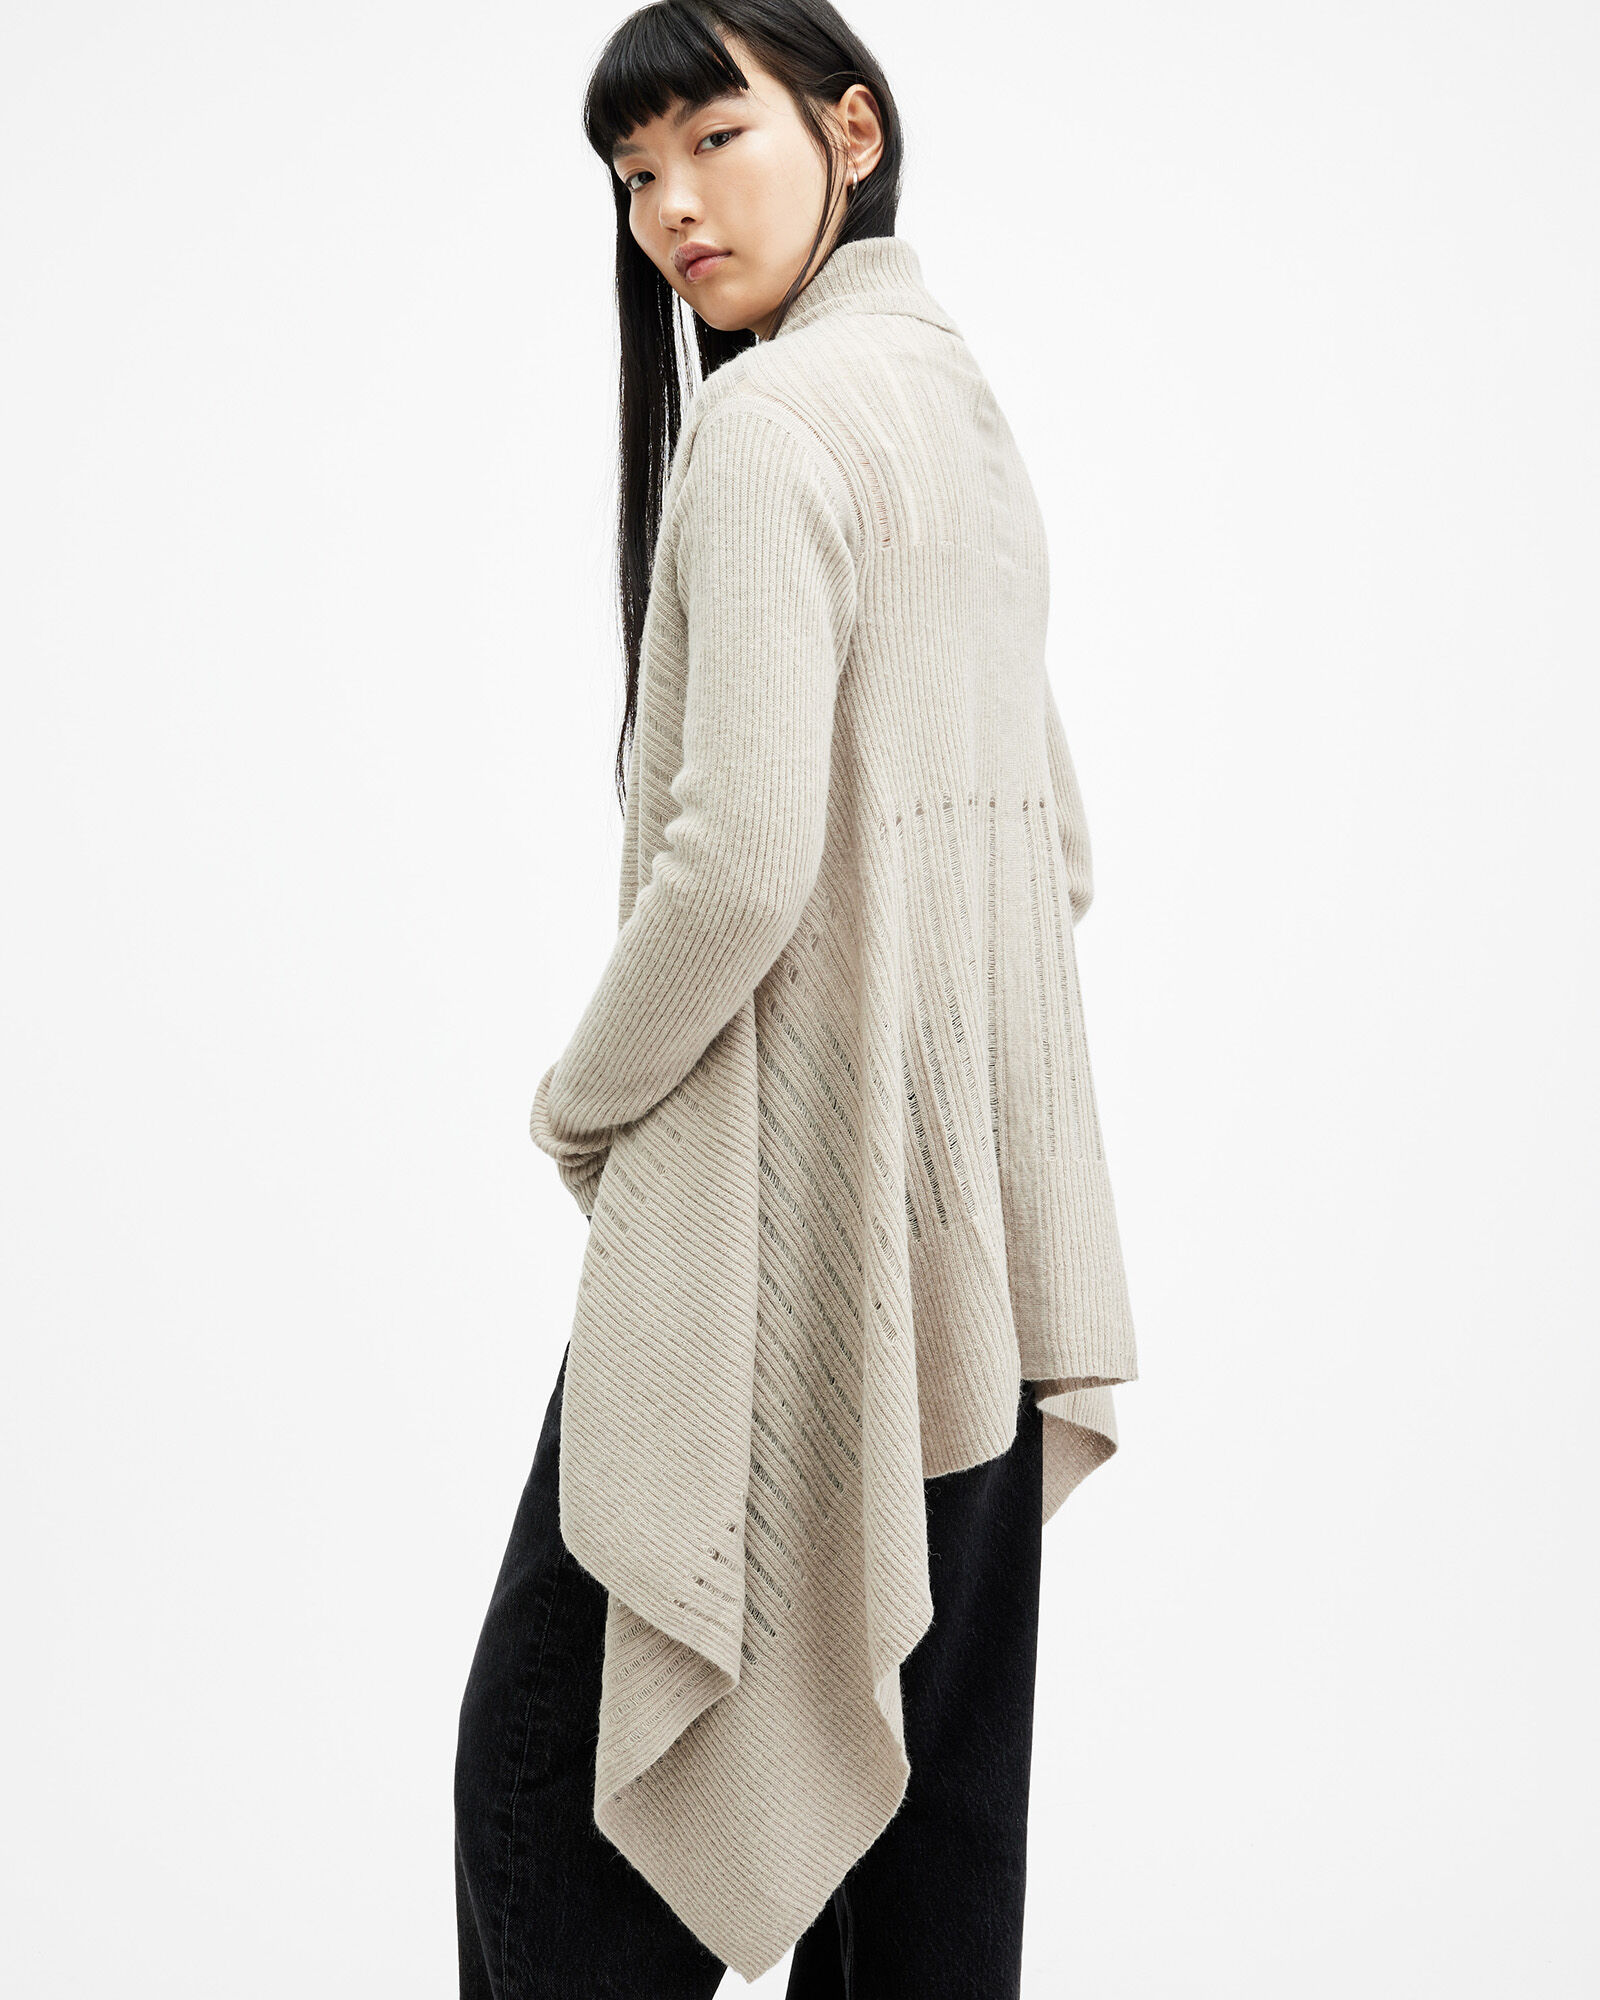 Harley Waterfall Open Front Cardigan